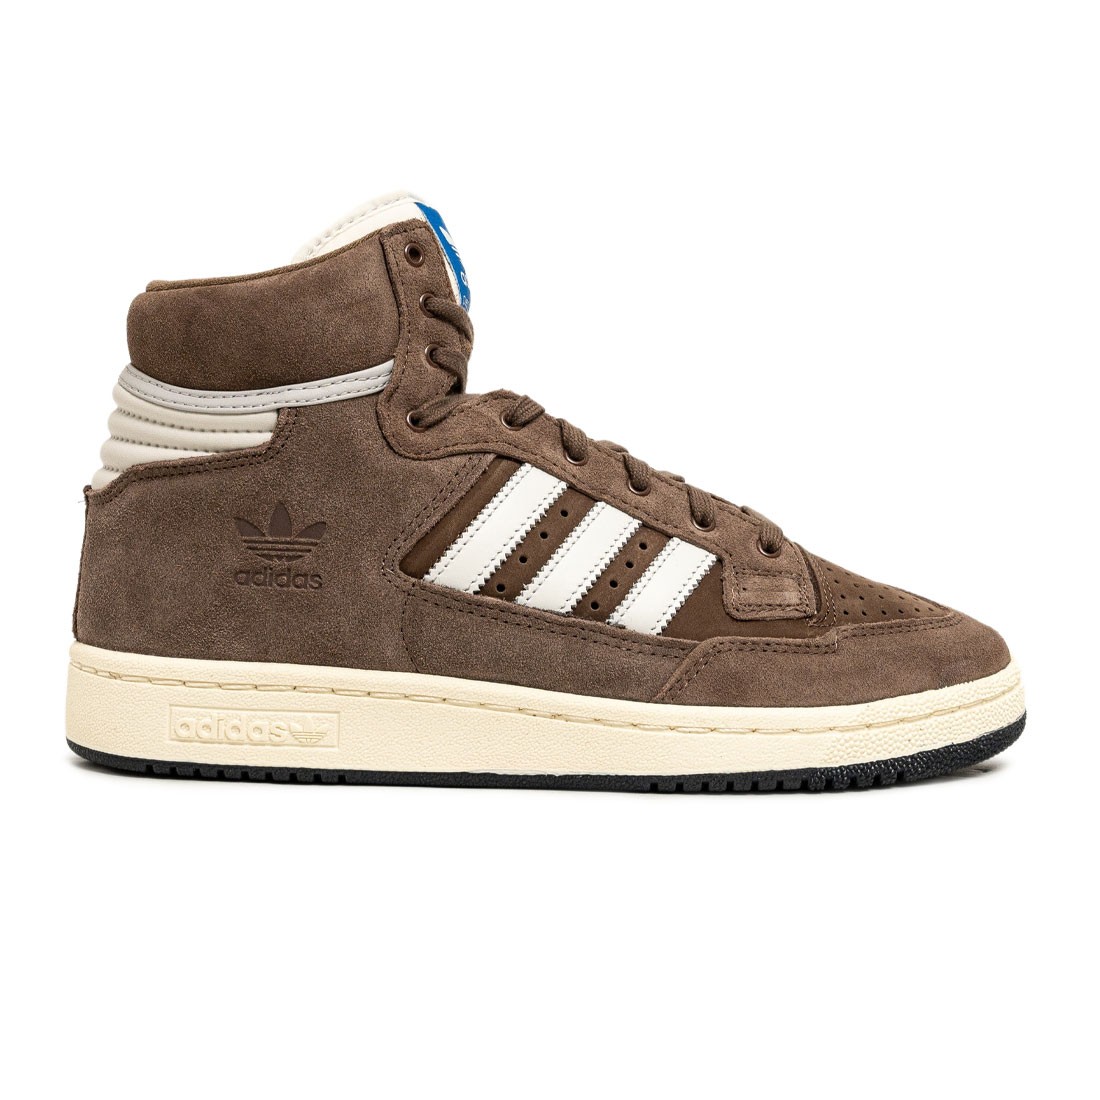 adidas b37093 pants for women shoes girls boots